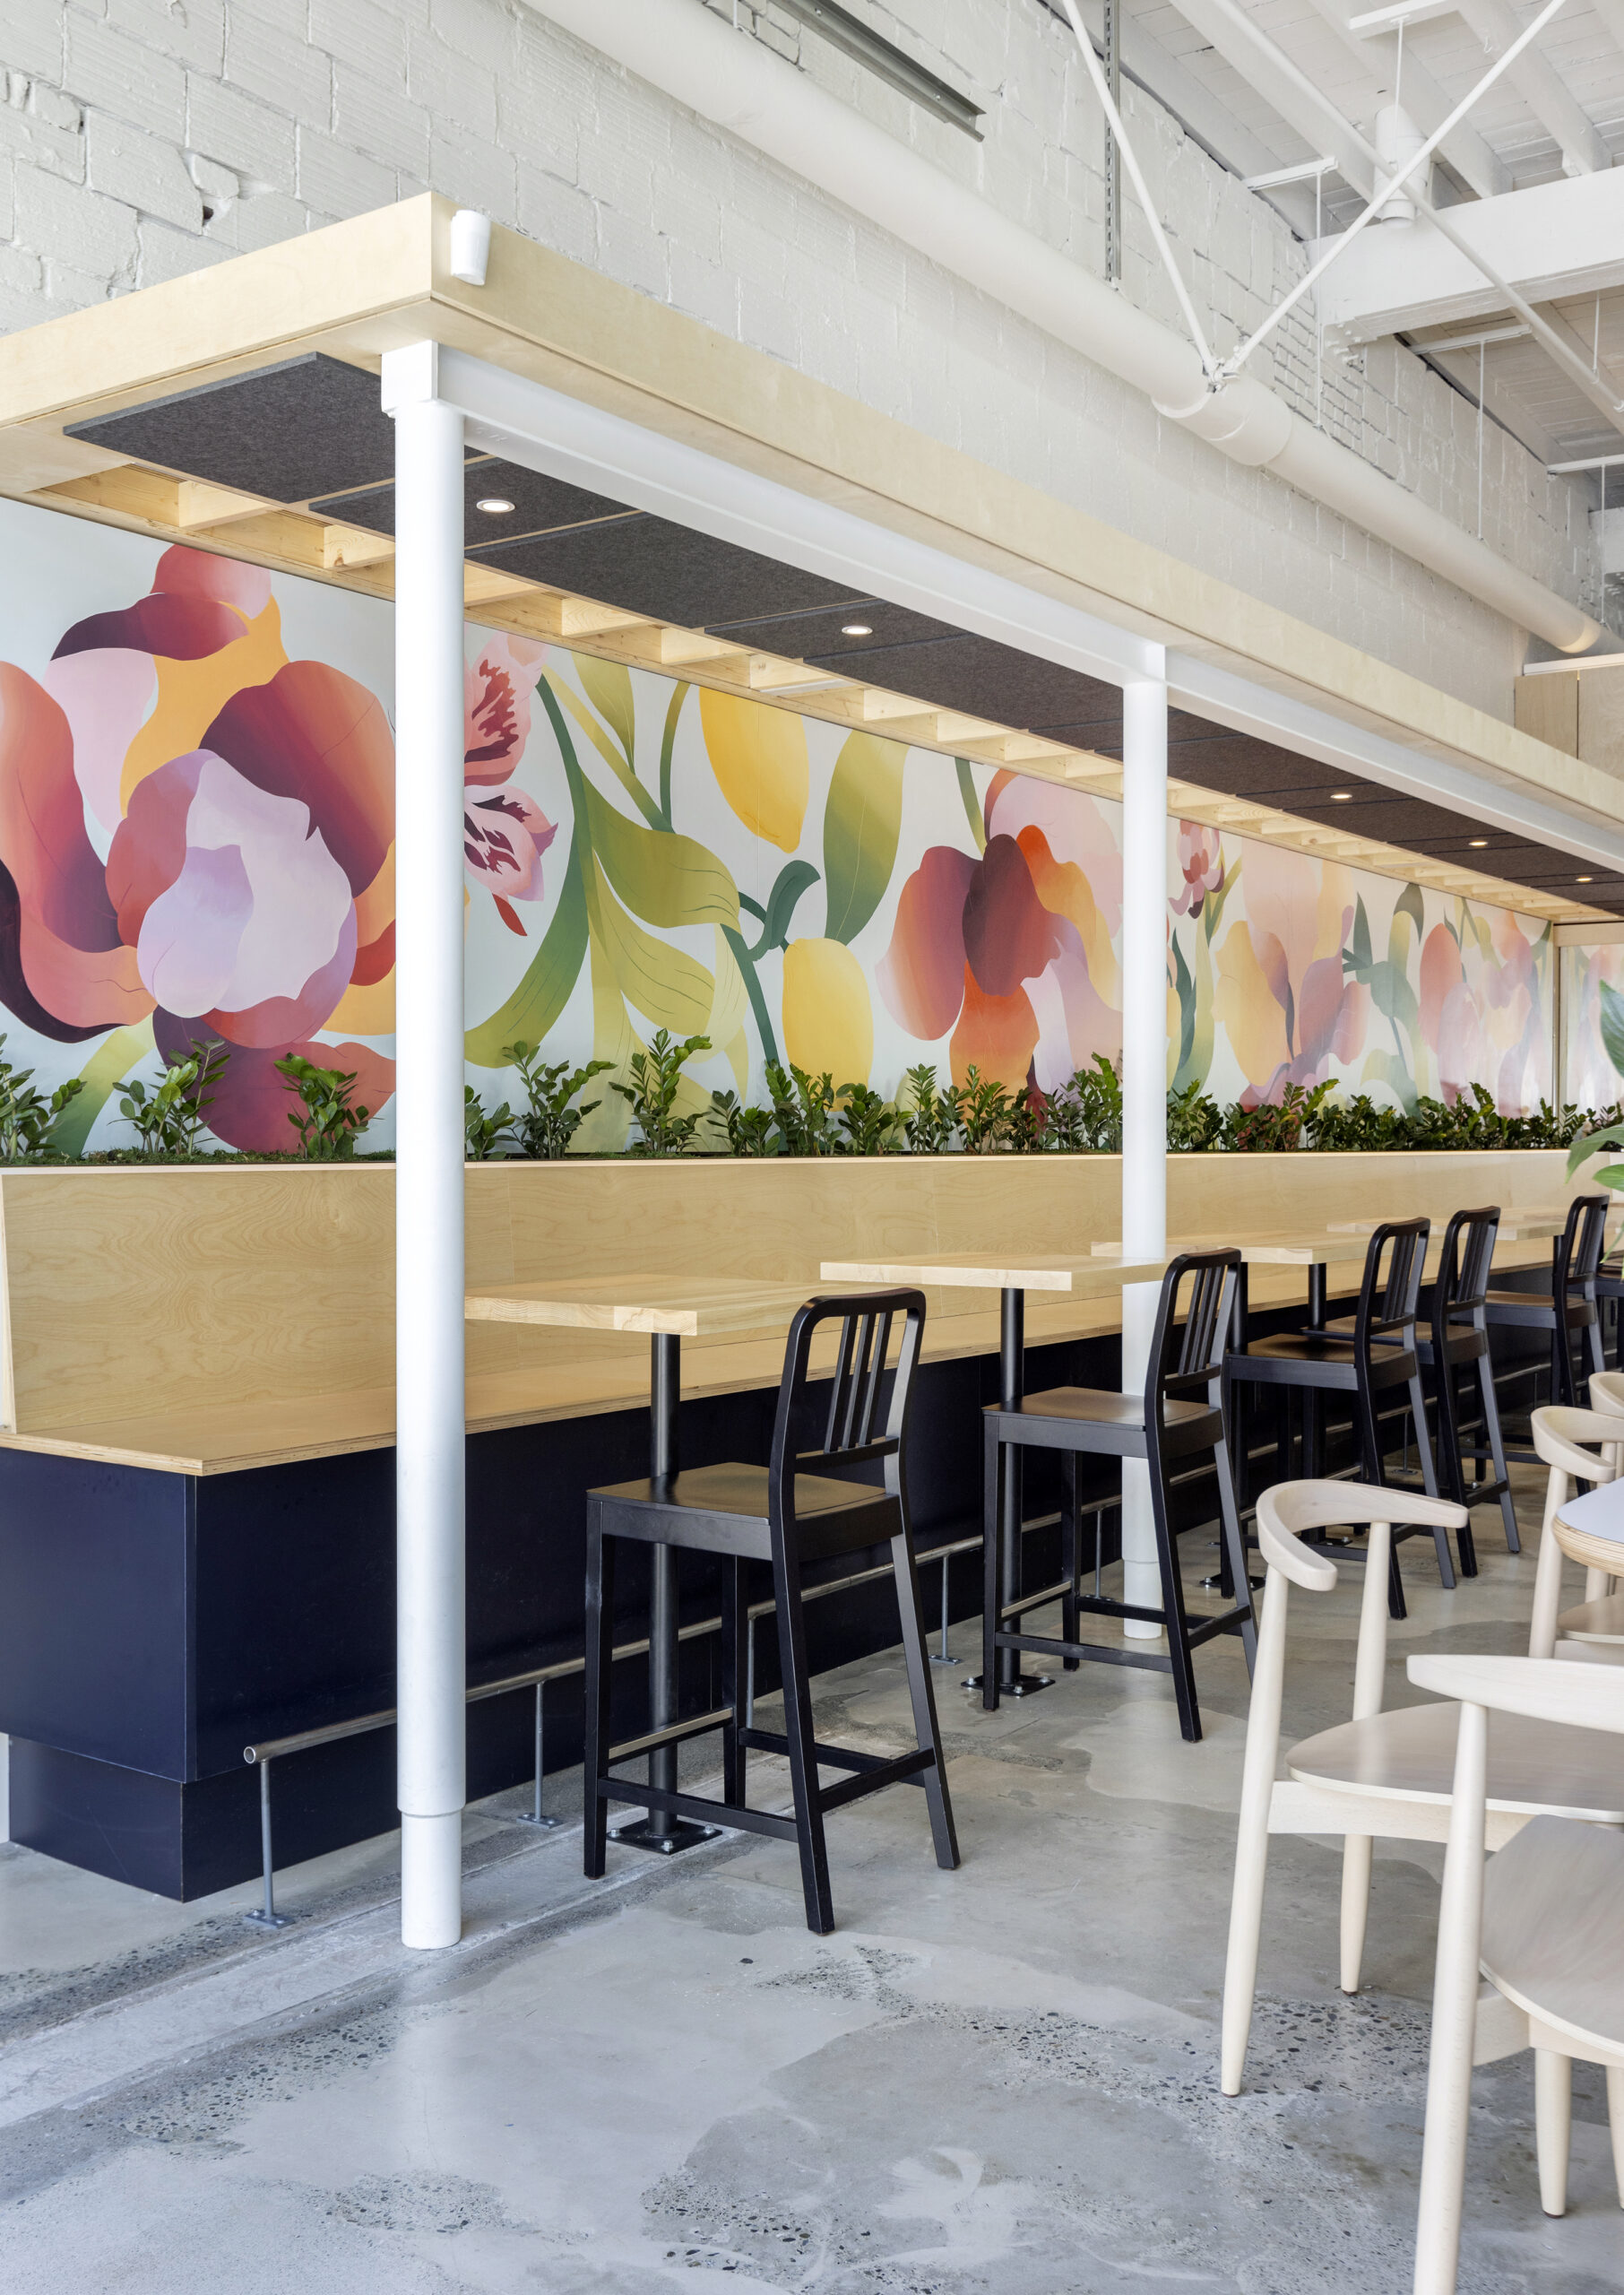 Modern and airy tasting room interior with natural wood furniture, vibrant floral mural, and abundant greenery in planters, showcasing a blend of minimalist design and botanical accents.